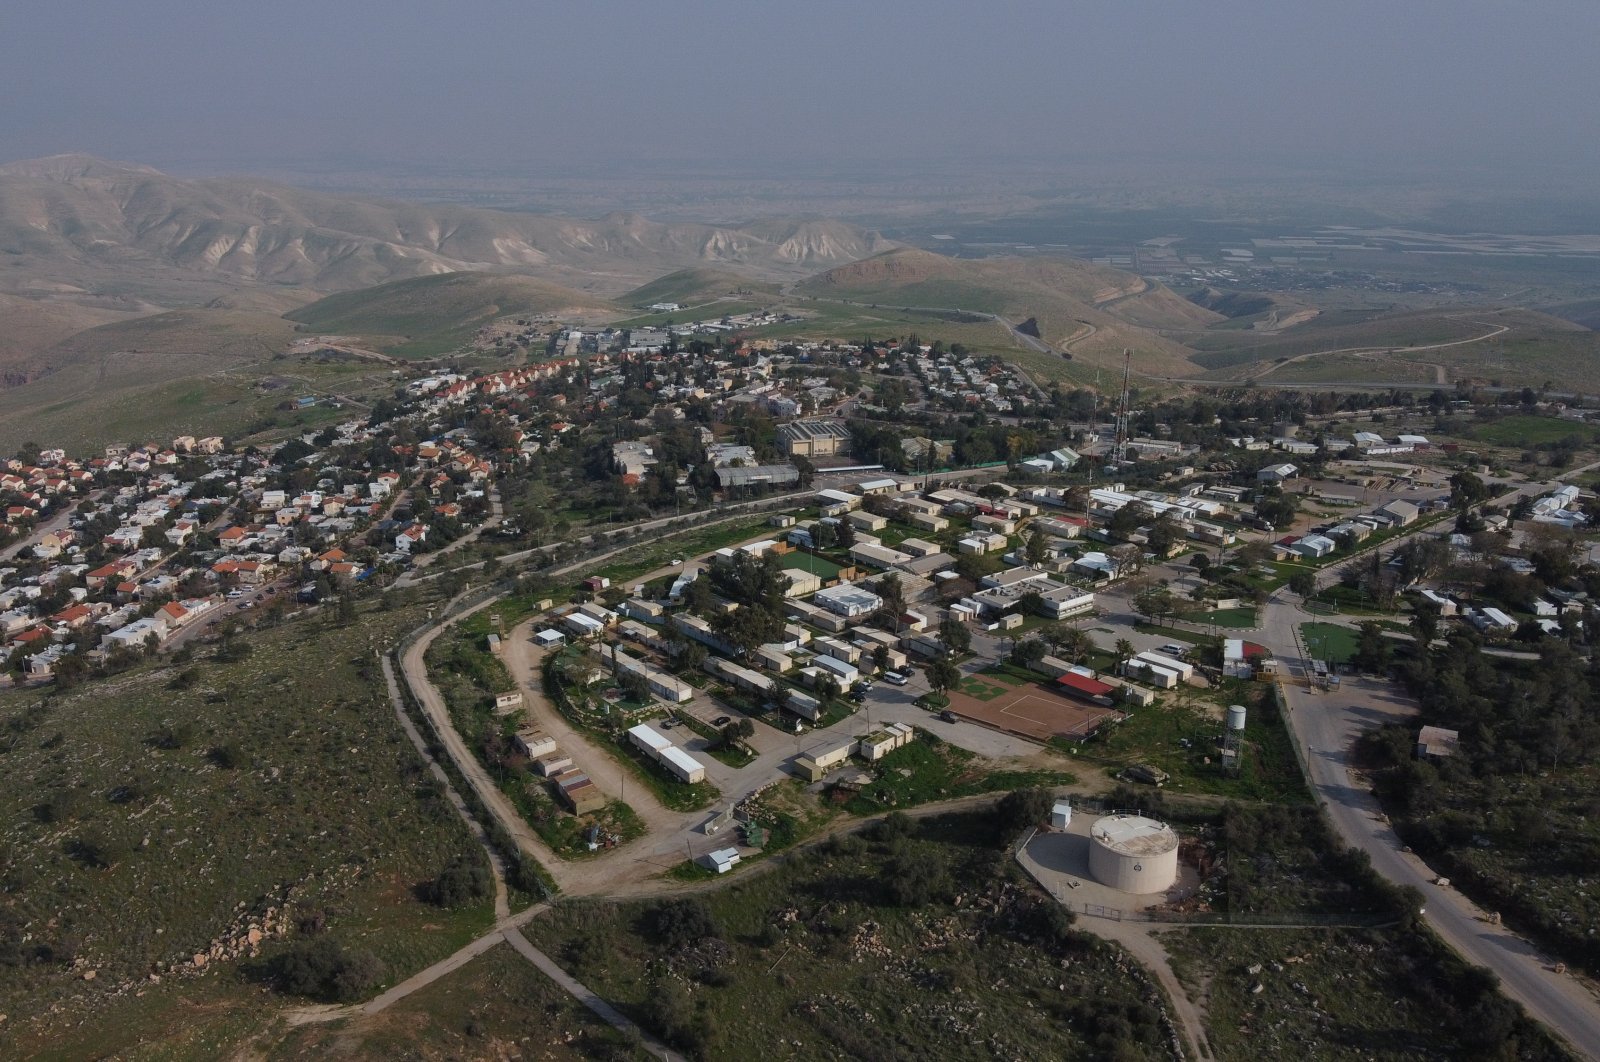 A view of the West Bank settlement of Ma'ale Efraim on the hills of the Jordan Valley, Feb. 18, 2020. (AP Photo)